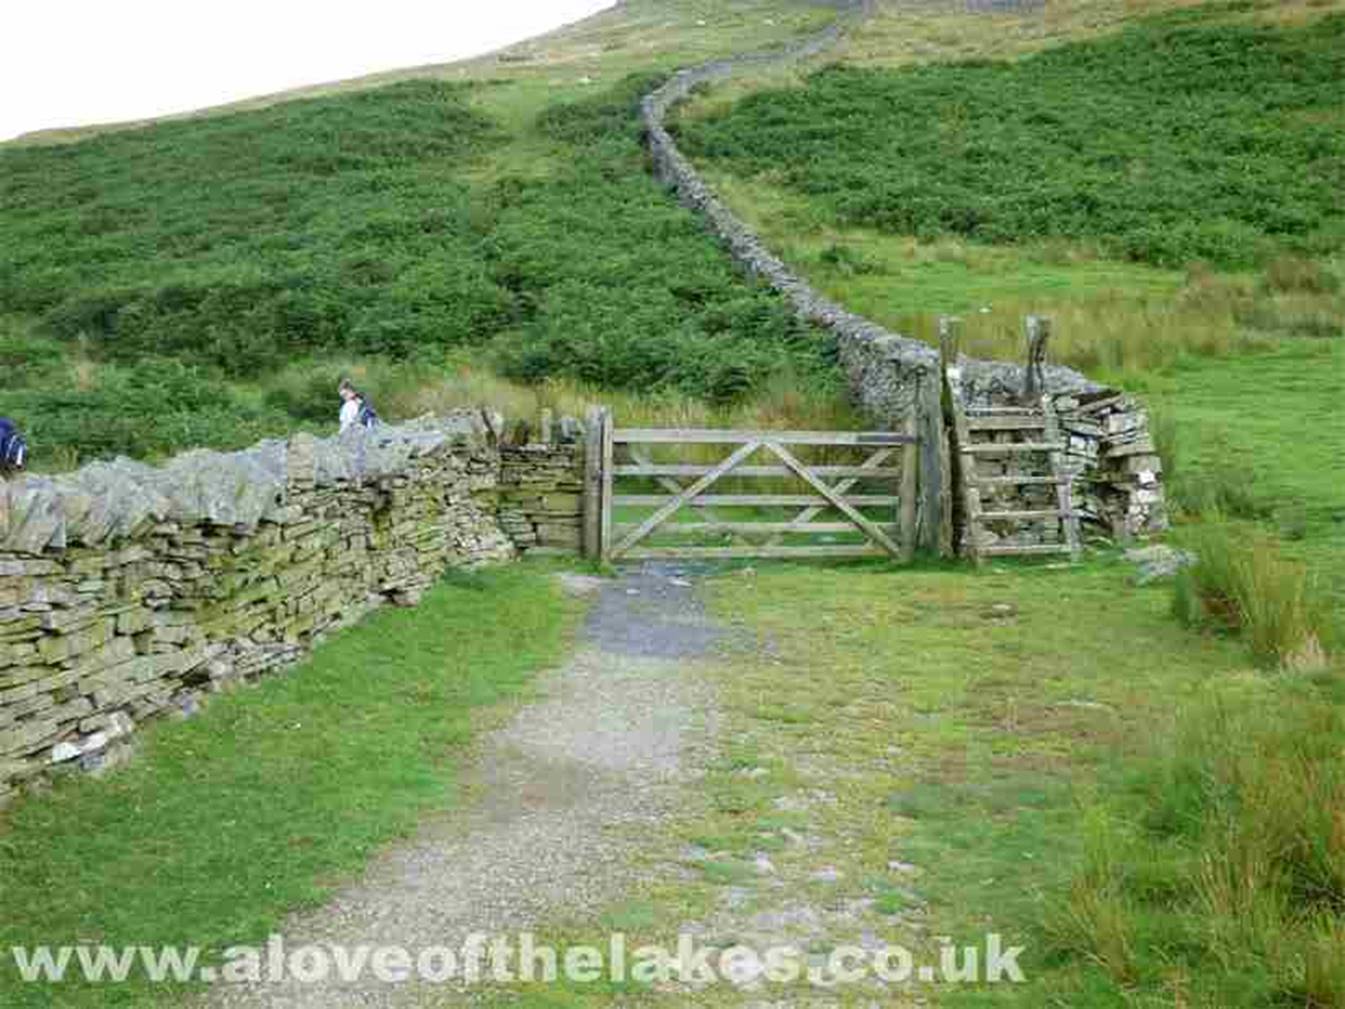 Eventually the bridleway reaches a gate and a stile, which if followed through leads on to the circular path walk above Loweswater. We took
a small detour to take in the fine views to be had, note though that the track we follow to Burnbank Fell summit (avoiding all steepness) takes
a sharp right at this point  see the shot later on
